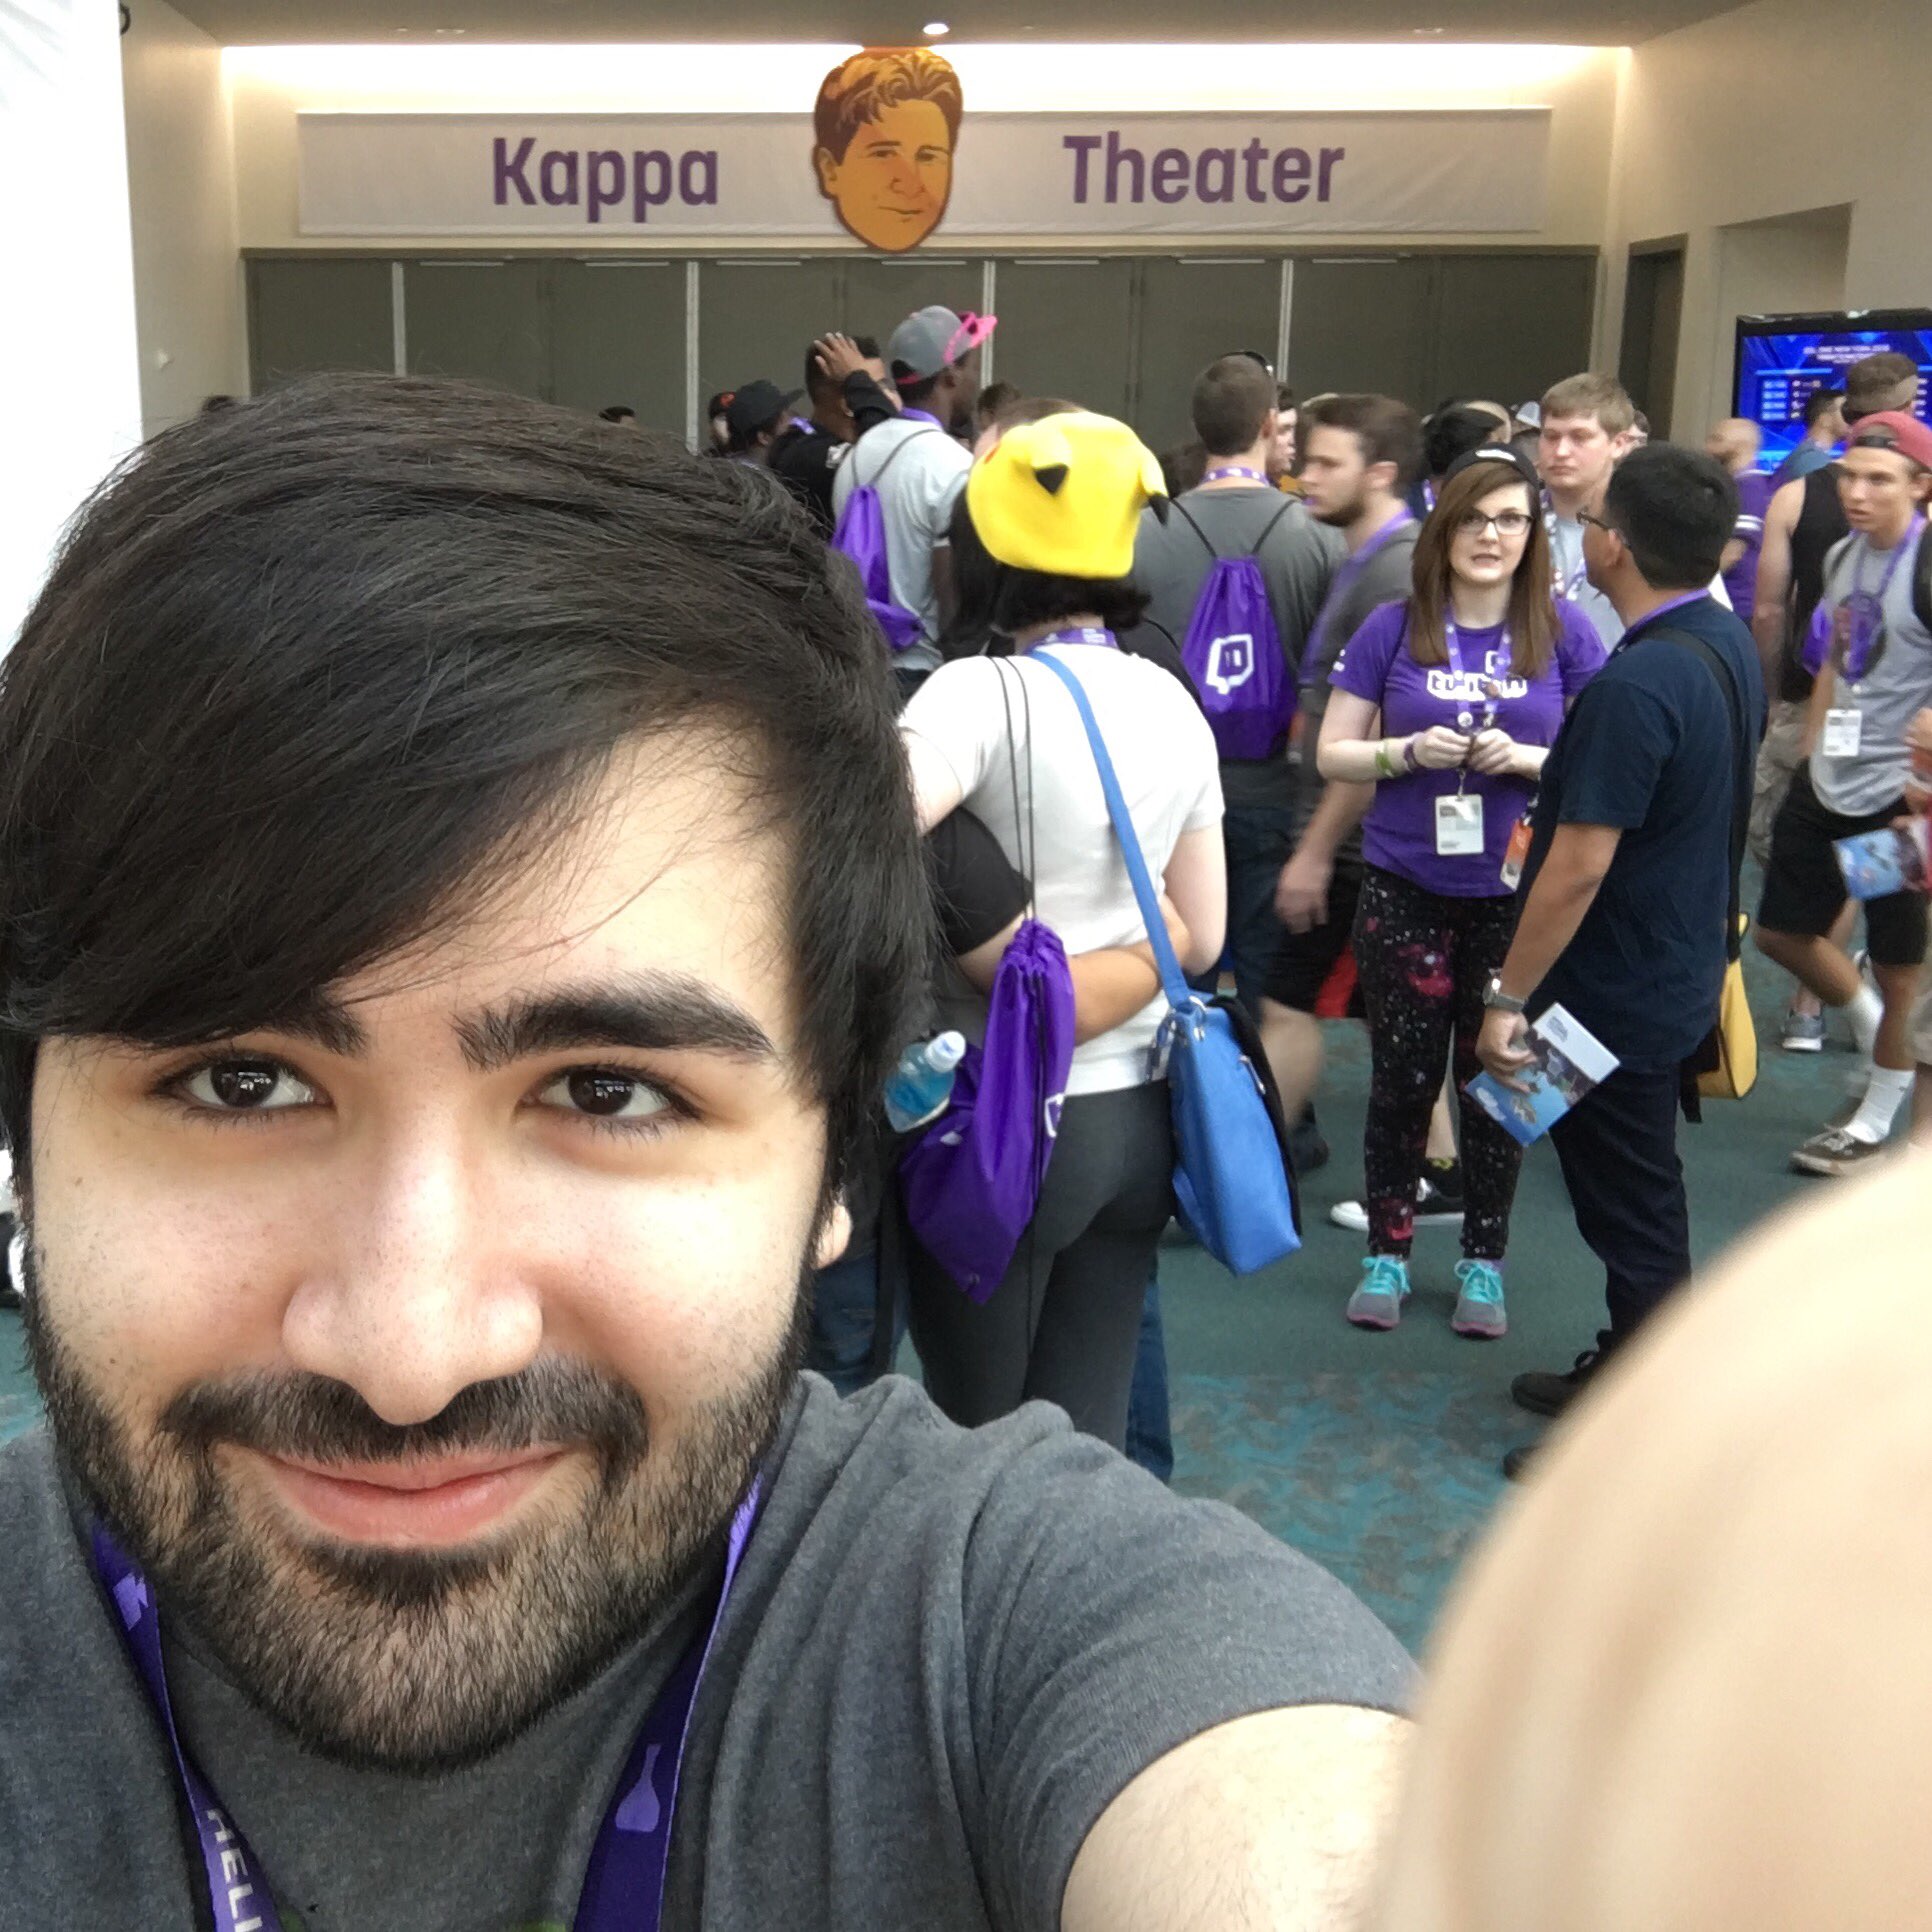 Joedat Twitter: "I found a real life Golden Kappa. All these years of Kappa in chat has finally paid off! https://t.co/98gRuPF1rB https://t.co/AOE8Xavg3C" / Twitter